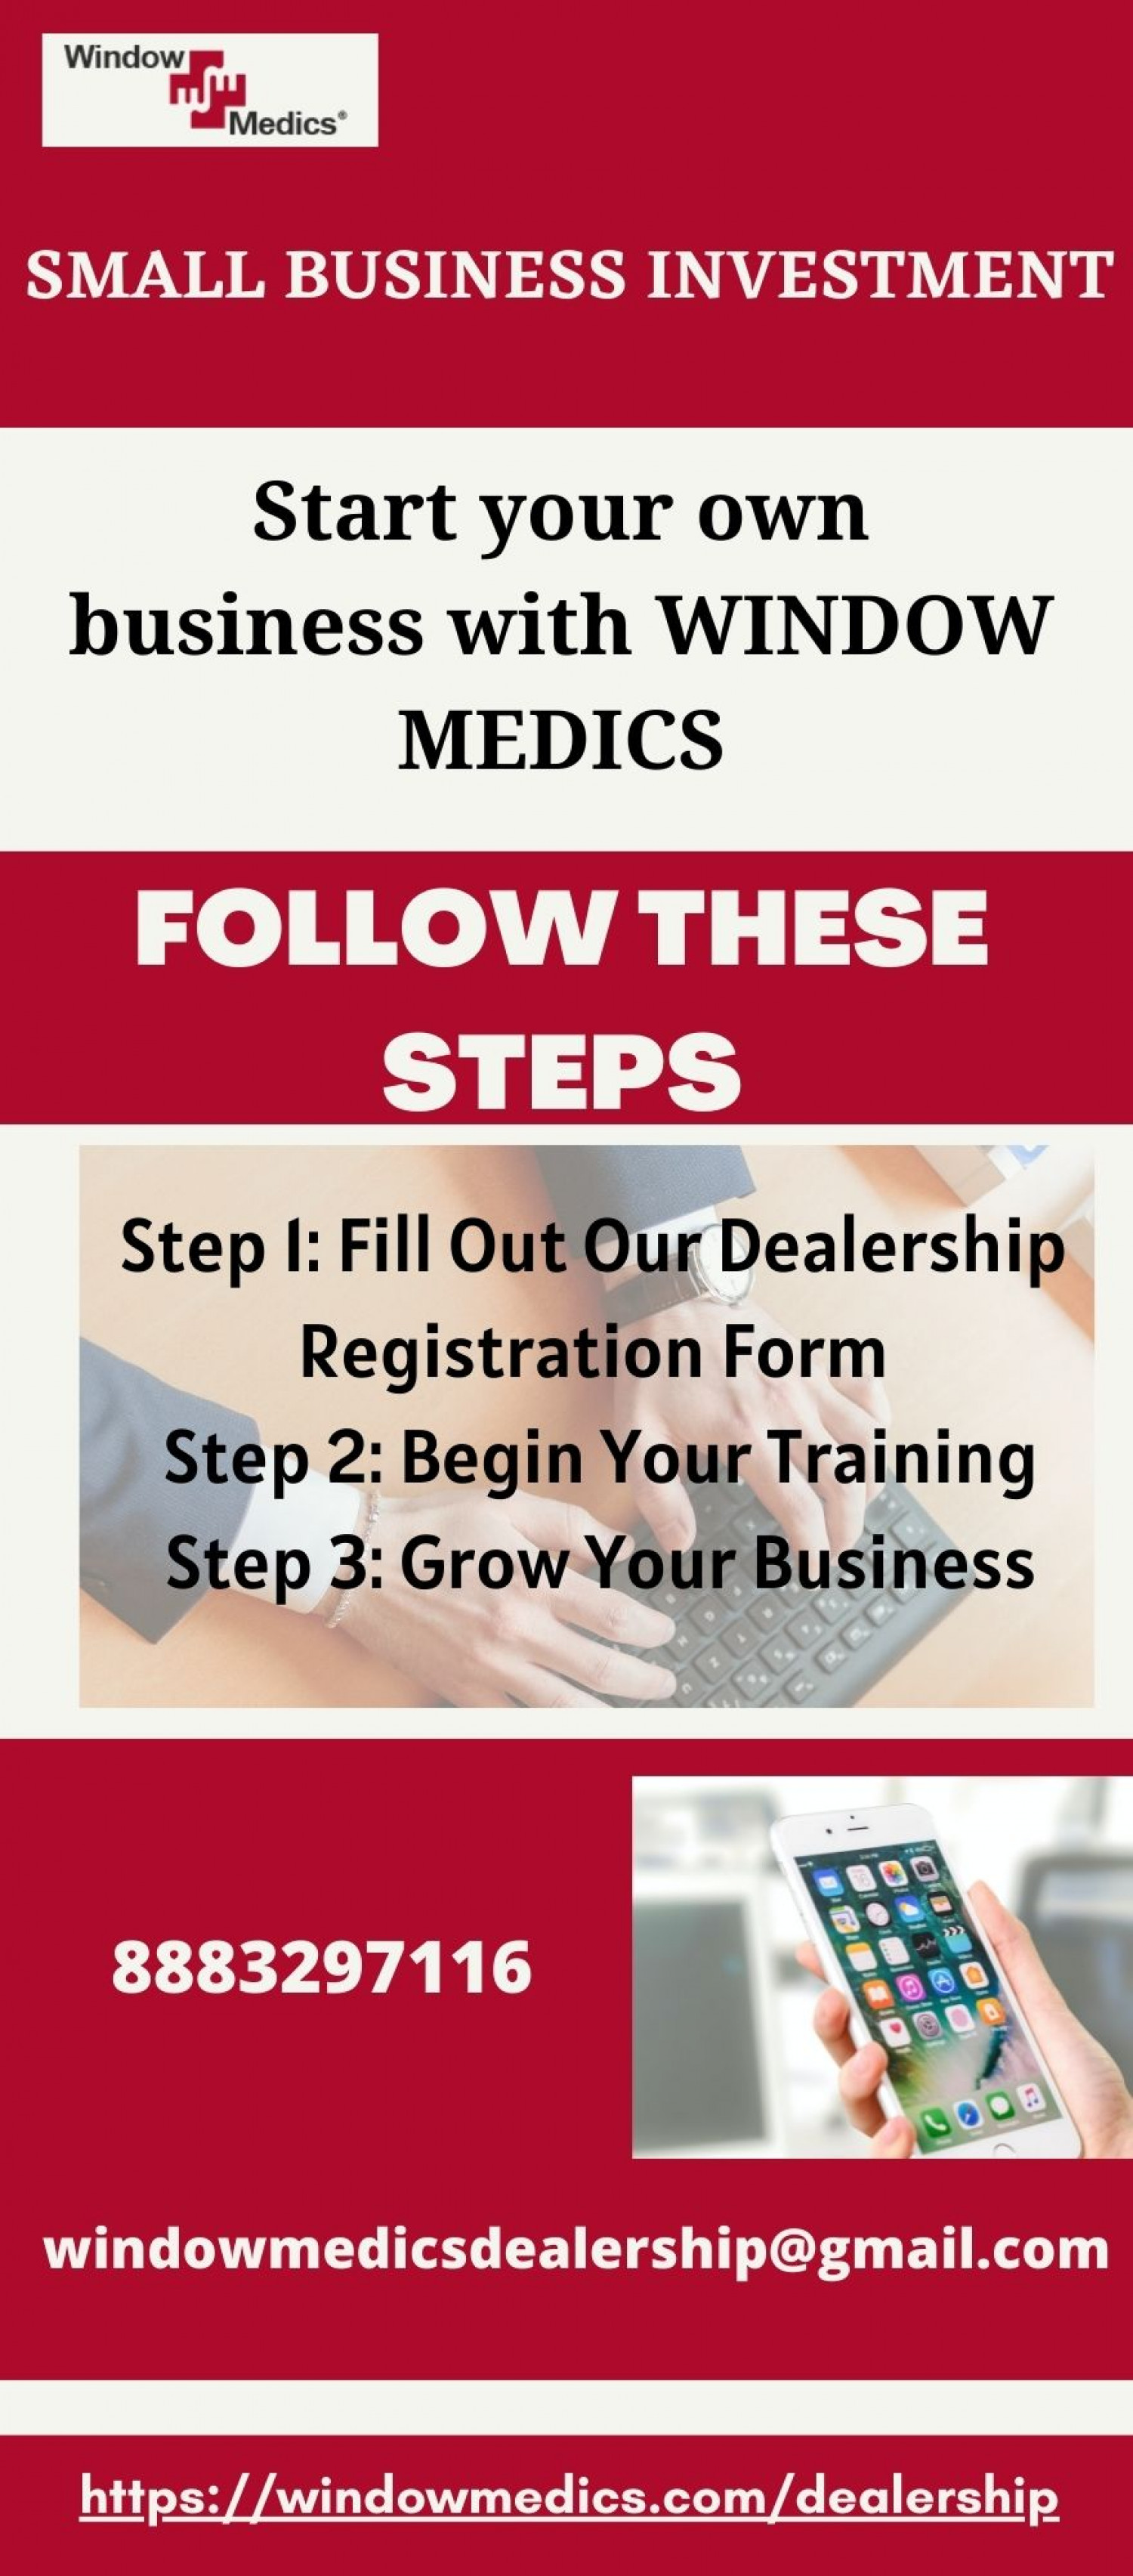 Small business investment - WINDOW MEDICS  Infographic